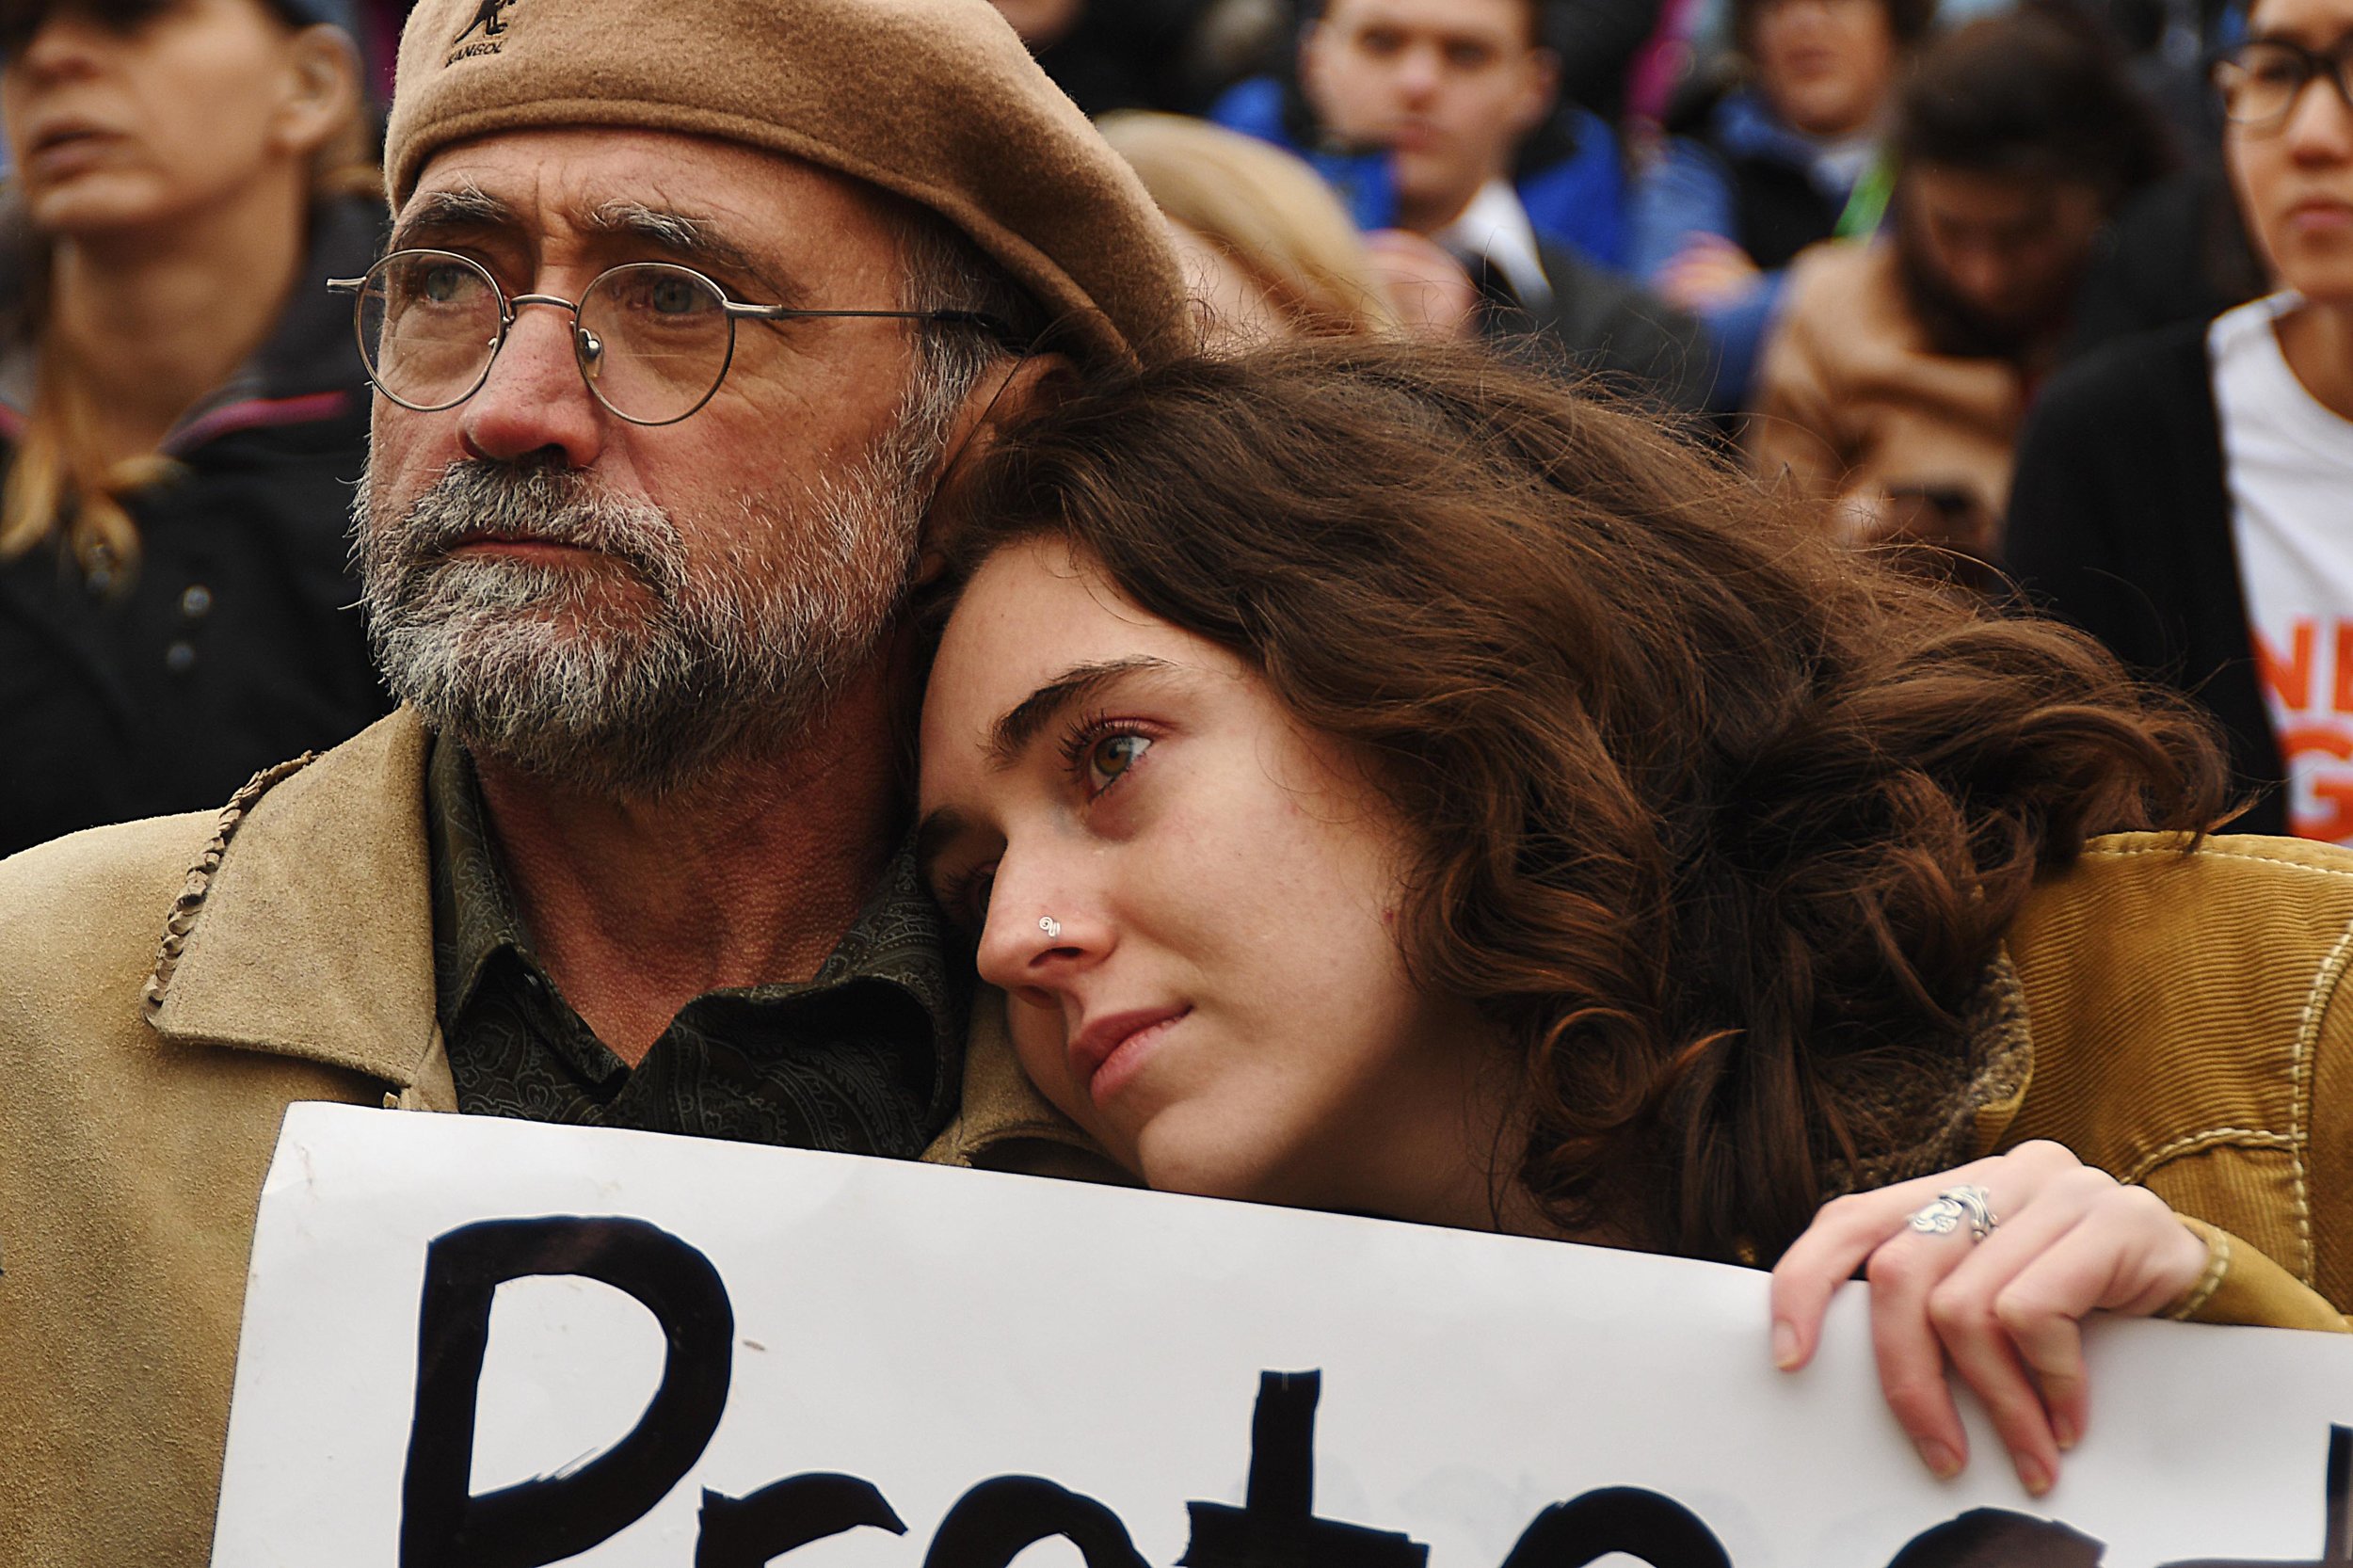  Stanley and Leta Groseclose listen to speakers at the March for Our Lives, Columbia, Mo. rally on March 24, 2018 in the wake of several mass shootings.  